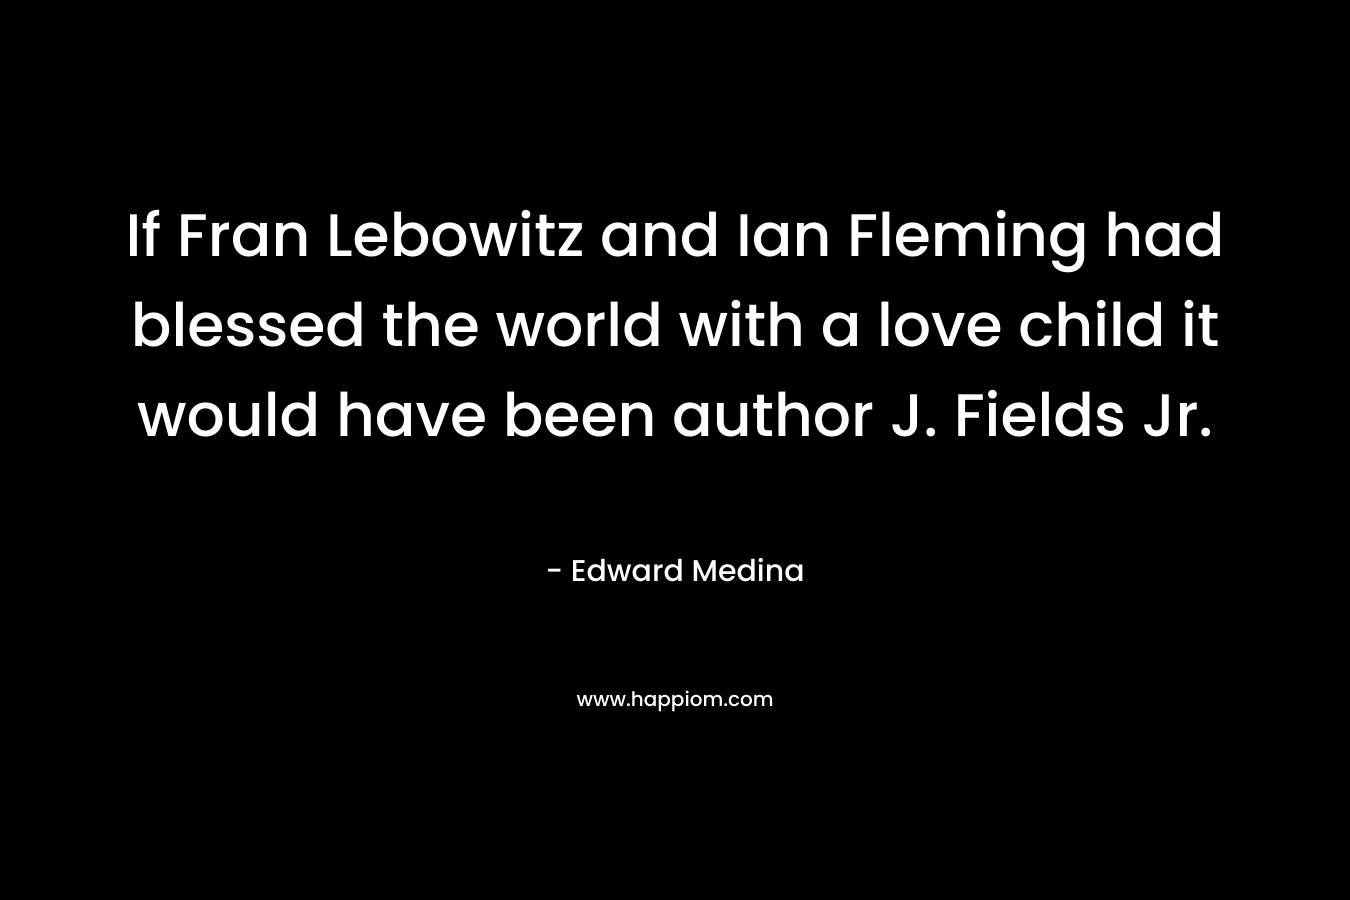 If Fran Lebowitz and Ian Fleming had blessed the world with a love child it would have been author J. Fields Jr. – Edward Medina